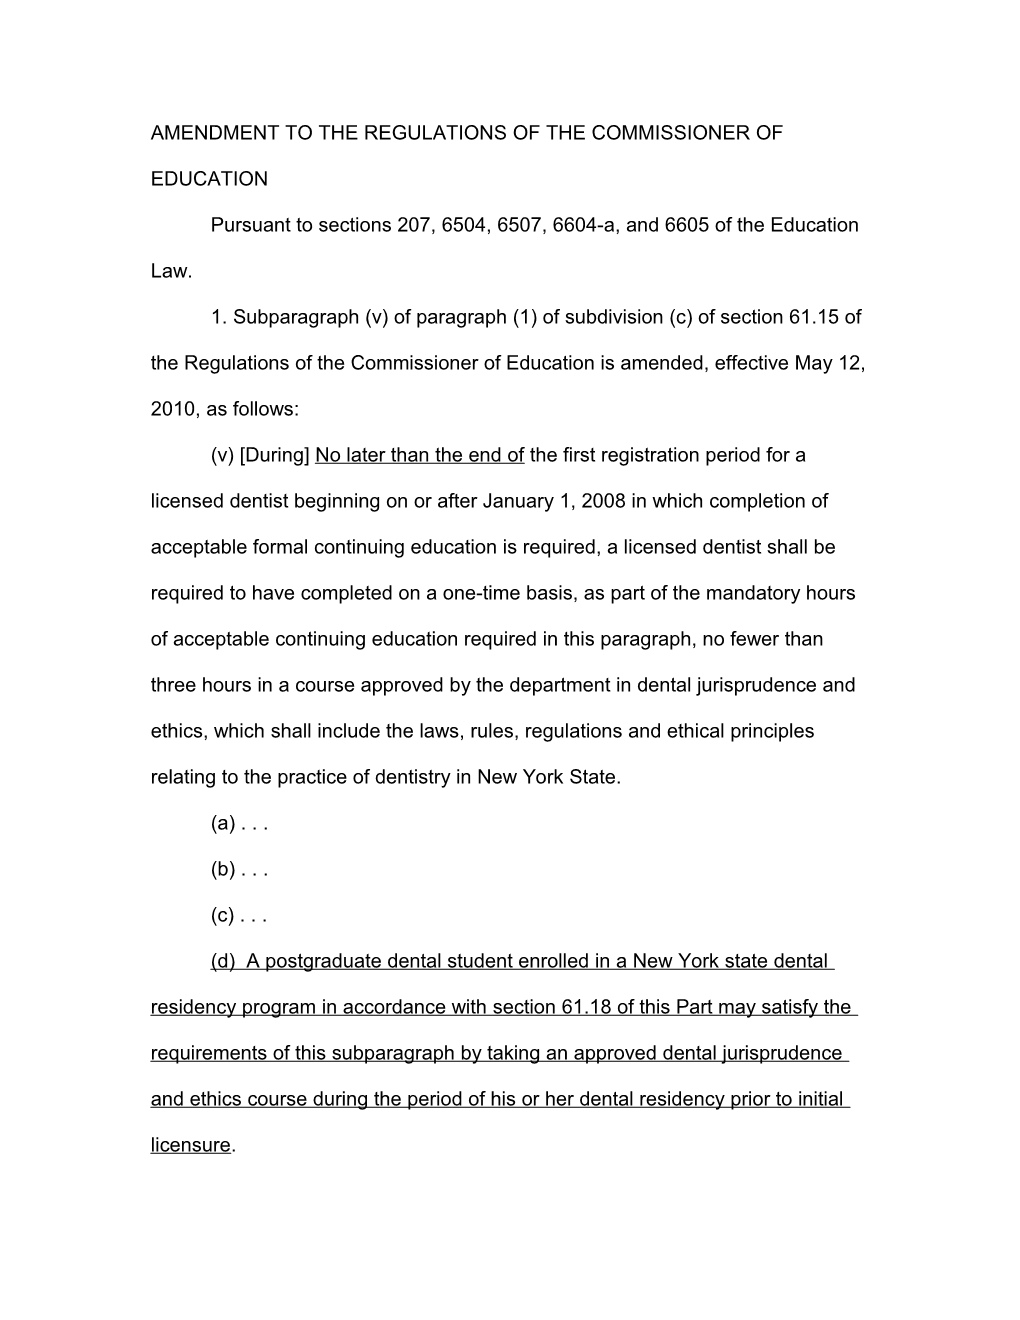 Amendment to the Regulations of the Commissioner of Education s1